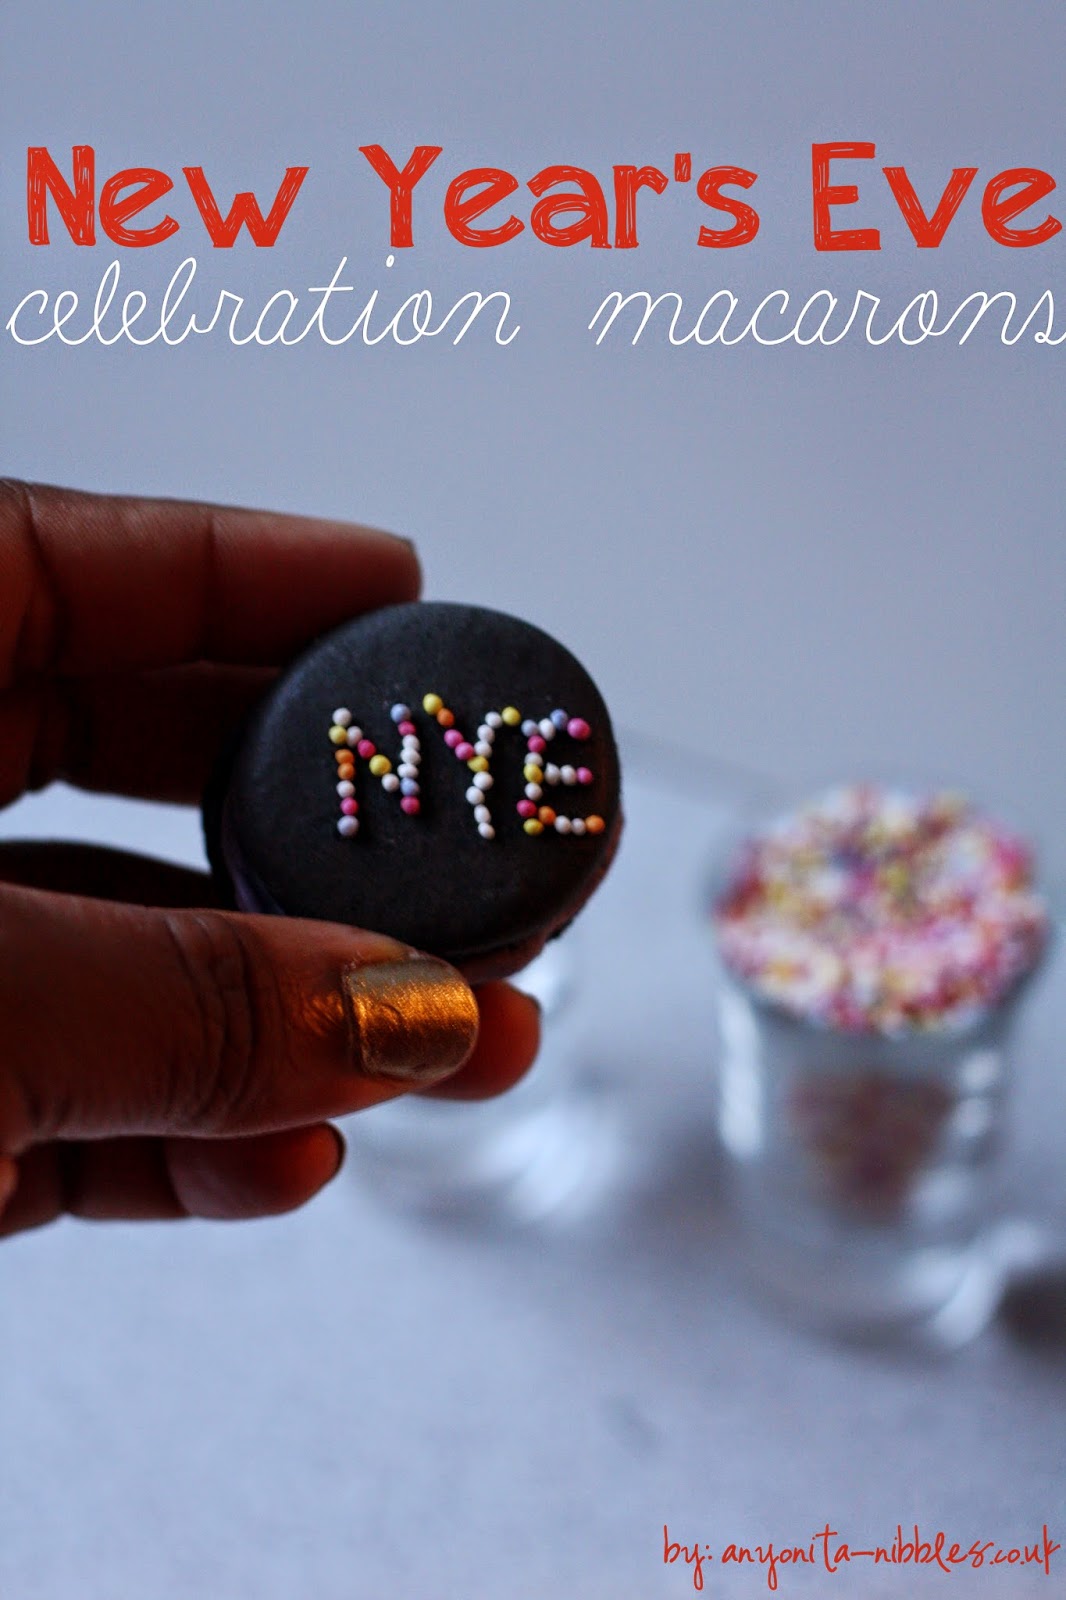 New Year's Eve Celebration Macarons from Anyonita-nibbles.co.uk